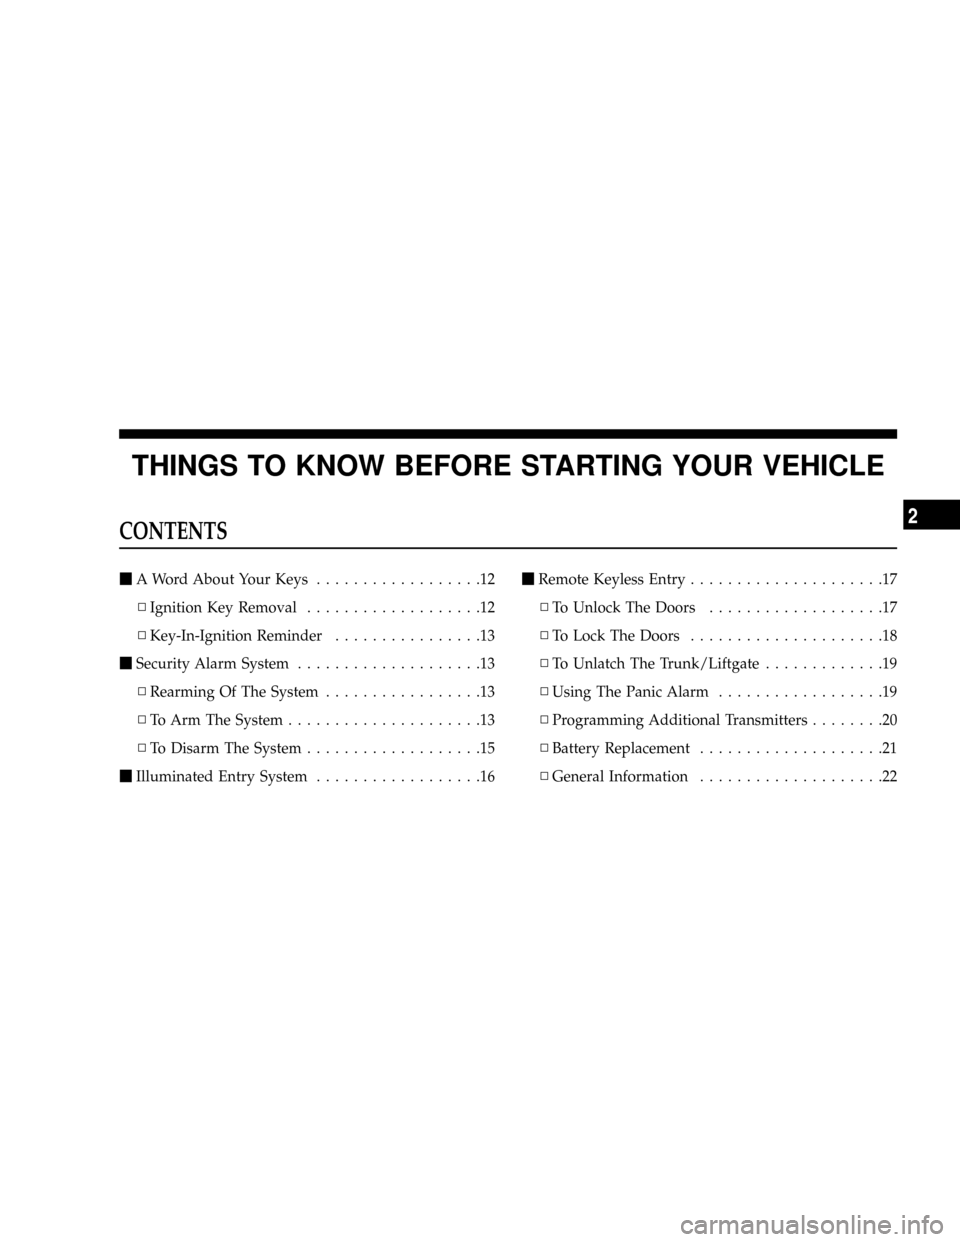 DODGE VIPER 2008 ZB II / 2.G Owners Manual THINGS TO KNOW BEFORE STARTING YOUR VEHICLE
CONTENTS
mA Word About Your Keys..................12
NIgnition Key Removal...................12
NKey-In-Ignition Reminder................13
mSecurity Alarm 